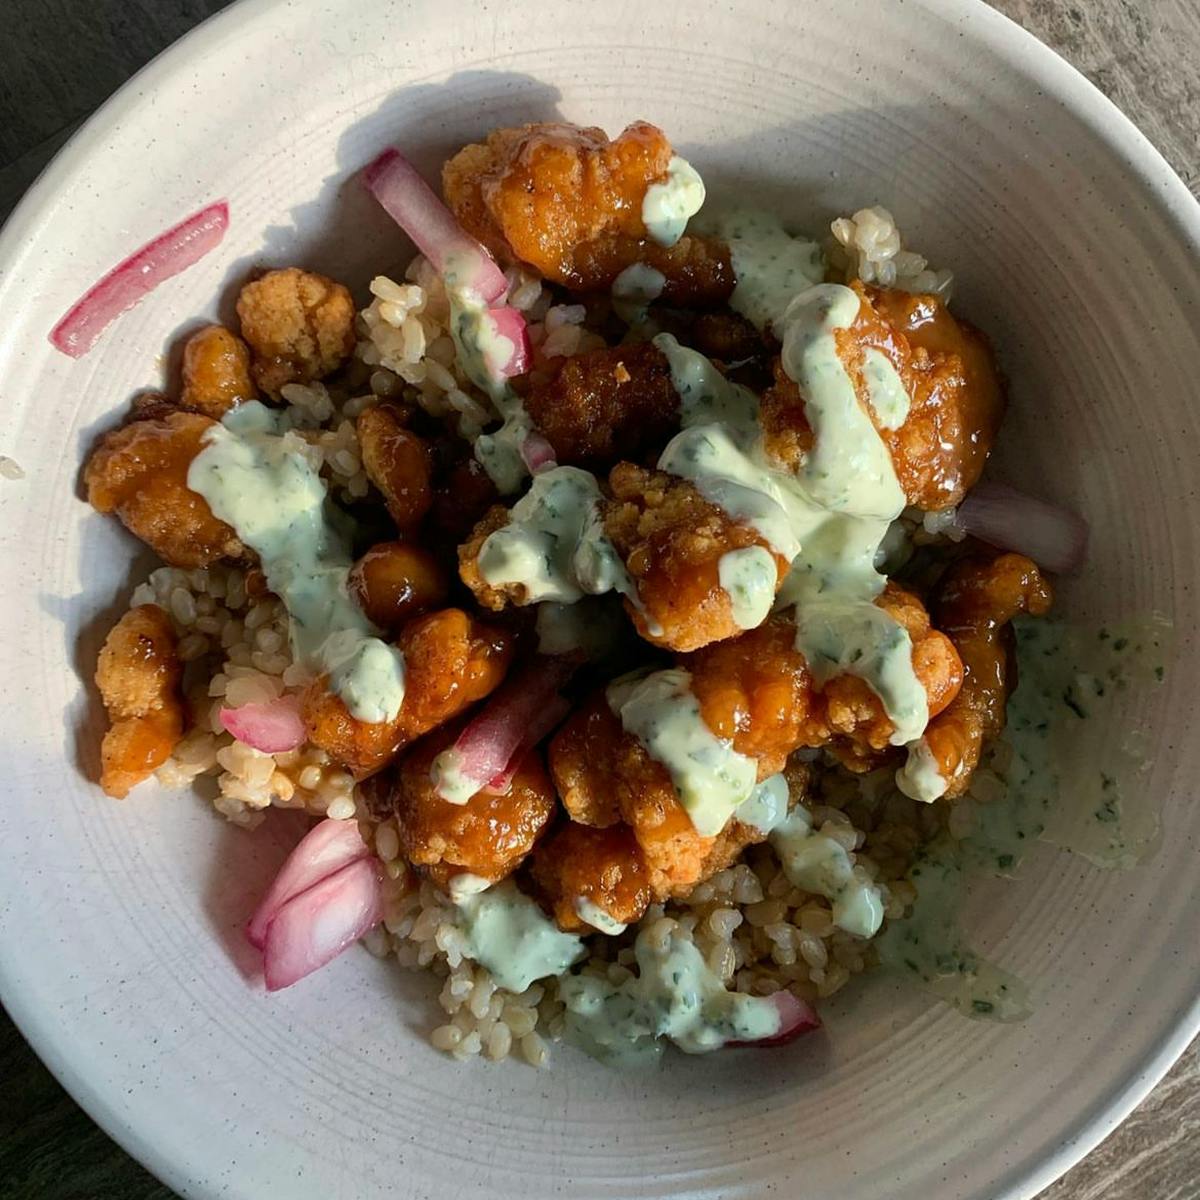 Chicken tikka bowls with pickled onions, rice, and mint sauce